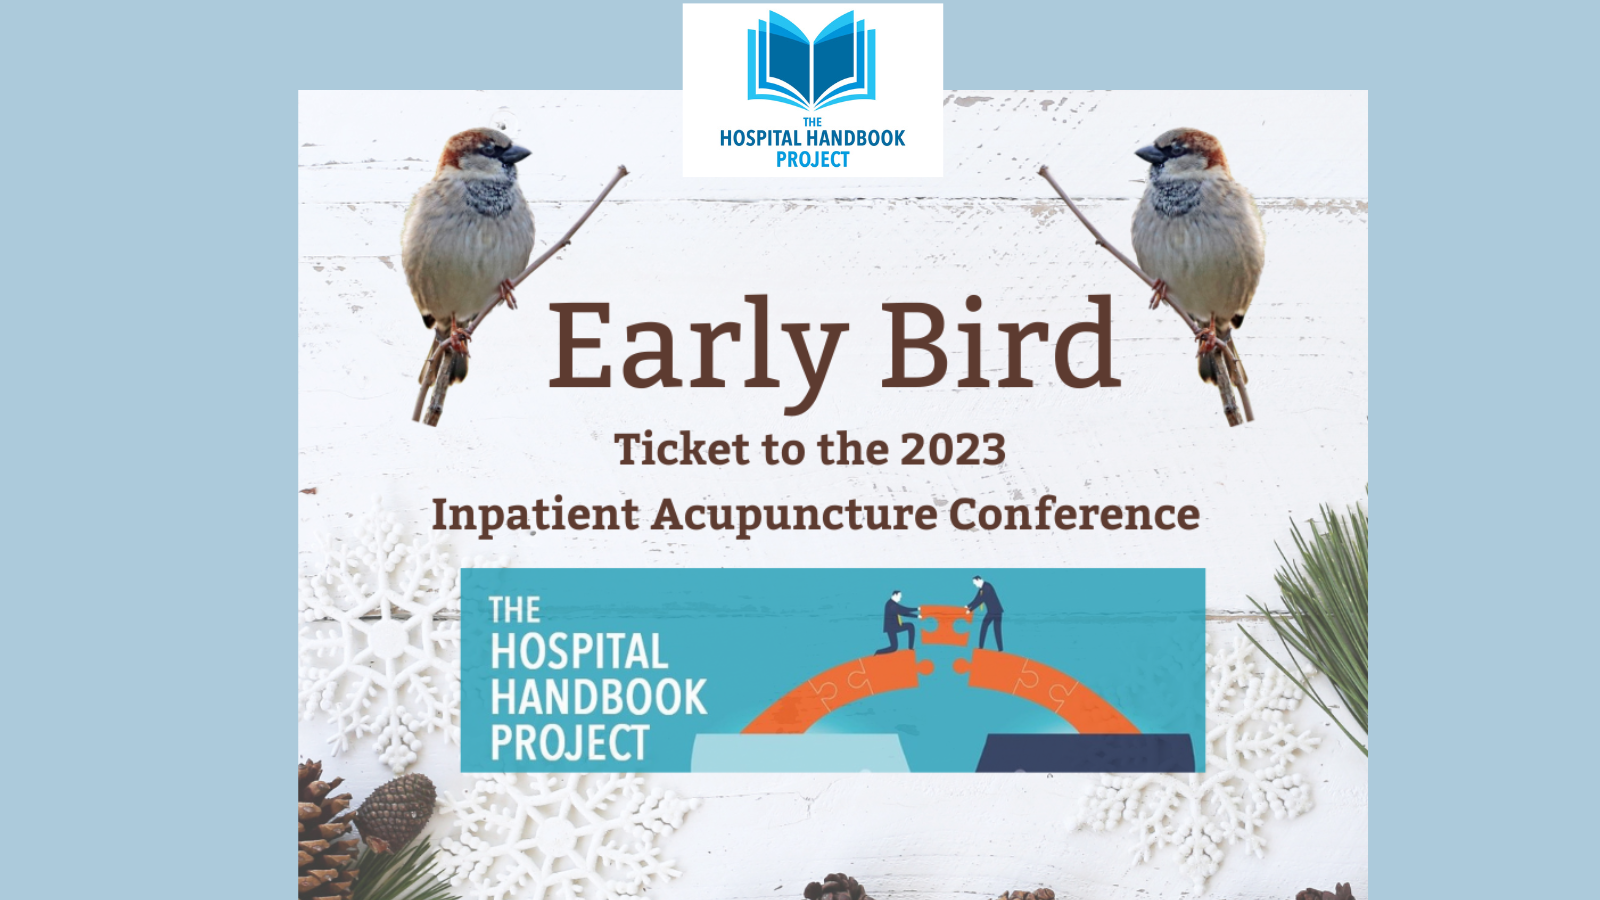 Inpatient Acu conf early bird ticket logo 1600 size.png